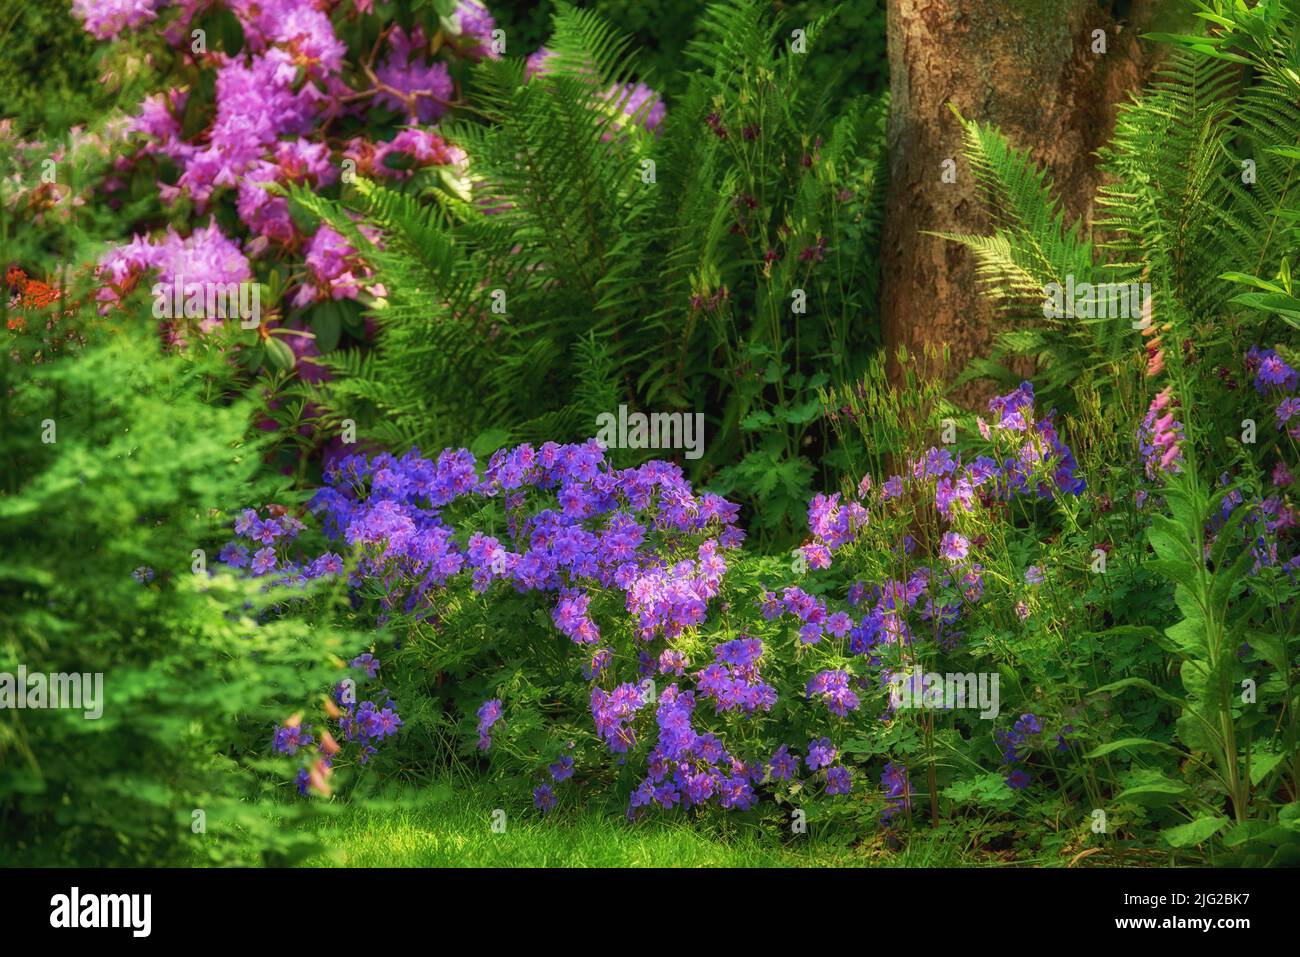 Vibrant clematis and pink columbine flowers growing in a scenic, lush private home garden. Botanical plants, bushes, shrubs, ferns, flora and trees in Stock Photo